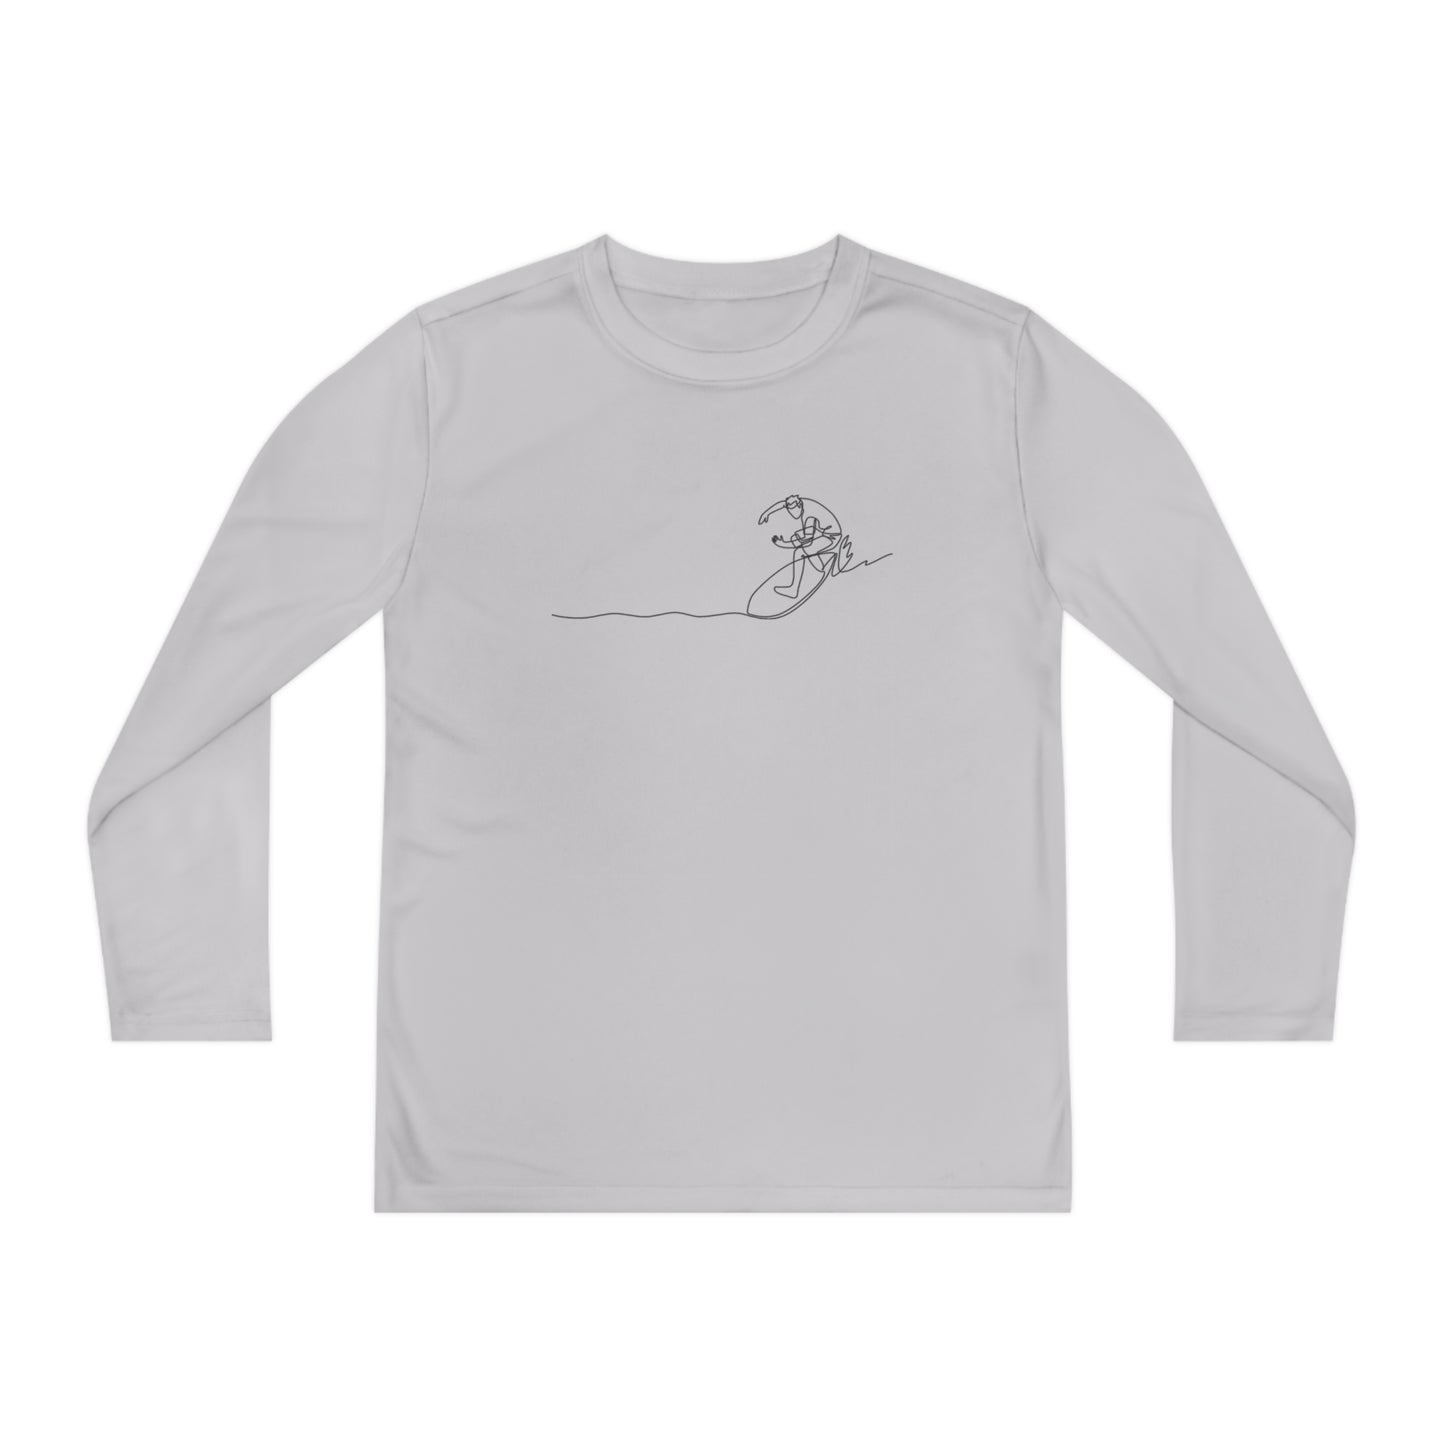 "L18º Surf Supply Co. | Surfing the Line" Youth L/S Performance Tee